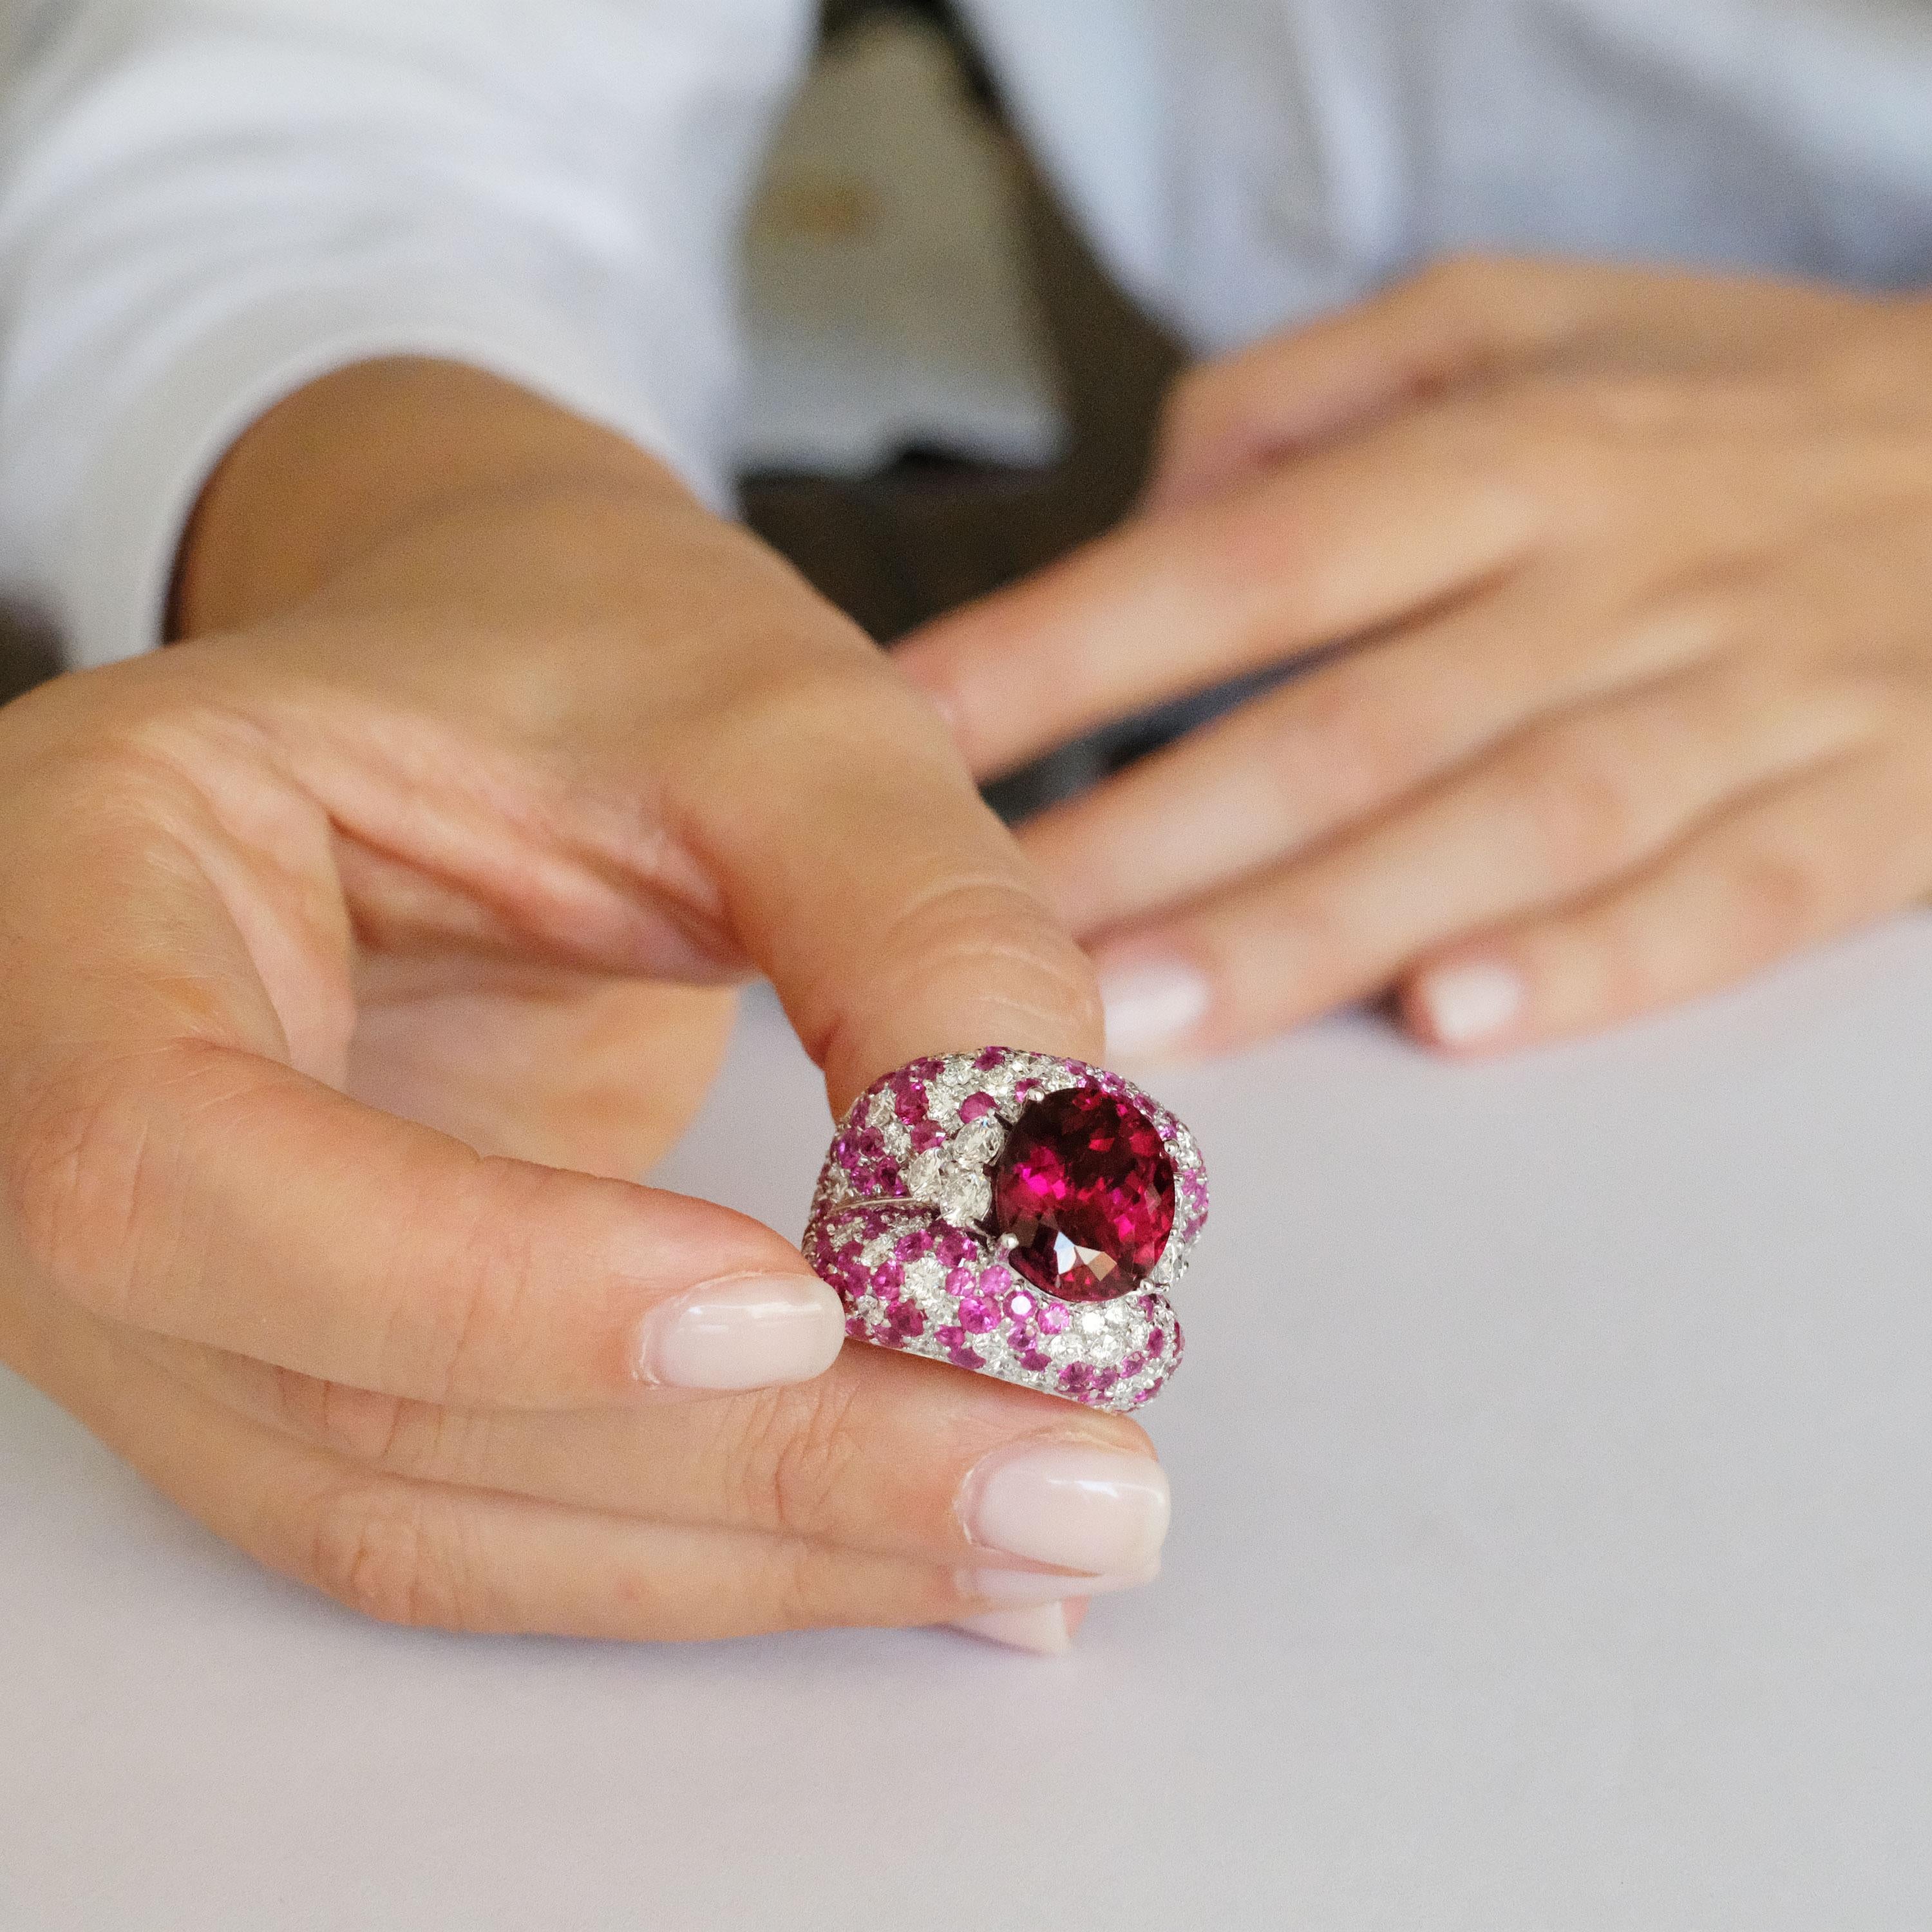 Women's Monseo 9.97 Carat Rubellite, Pink Sapphire and Diamond Cocktail Ring For Sale